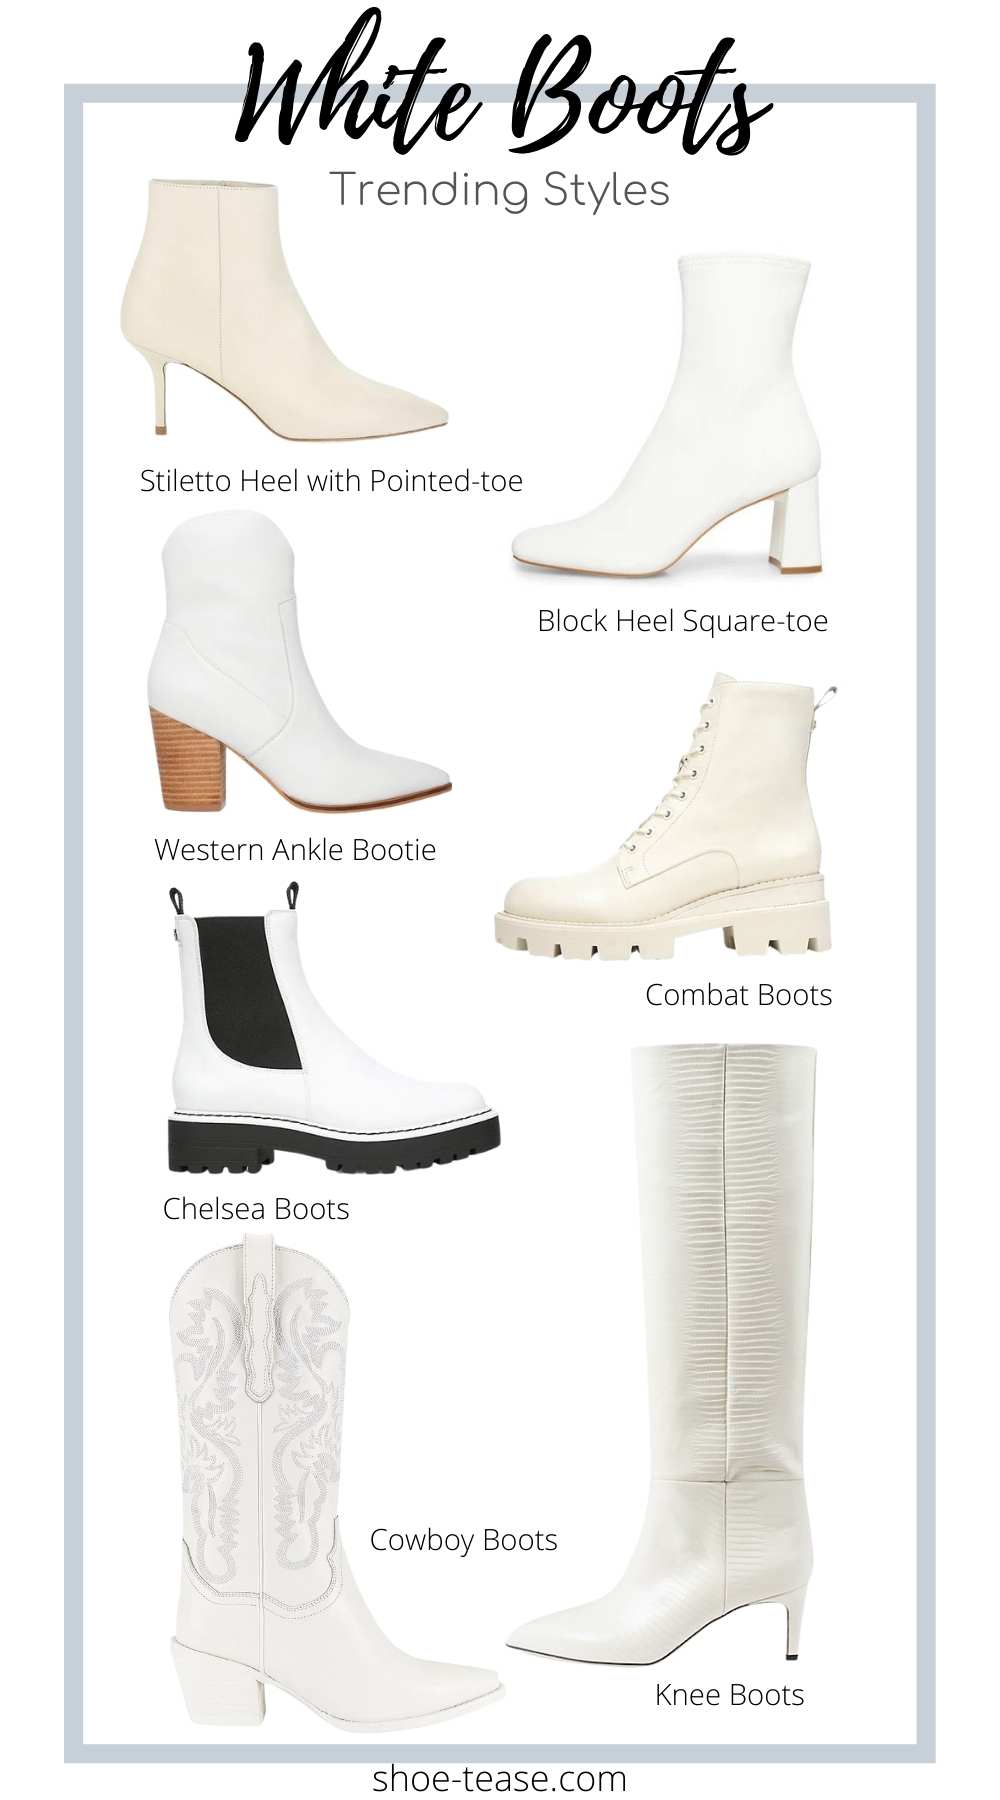 How to Wear White Boots Outfits - 55 Ideas with White Ankle to Knee Boots